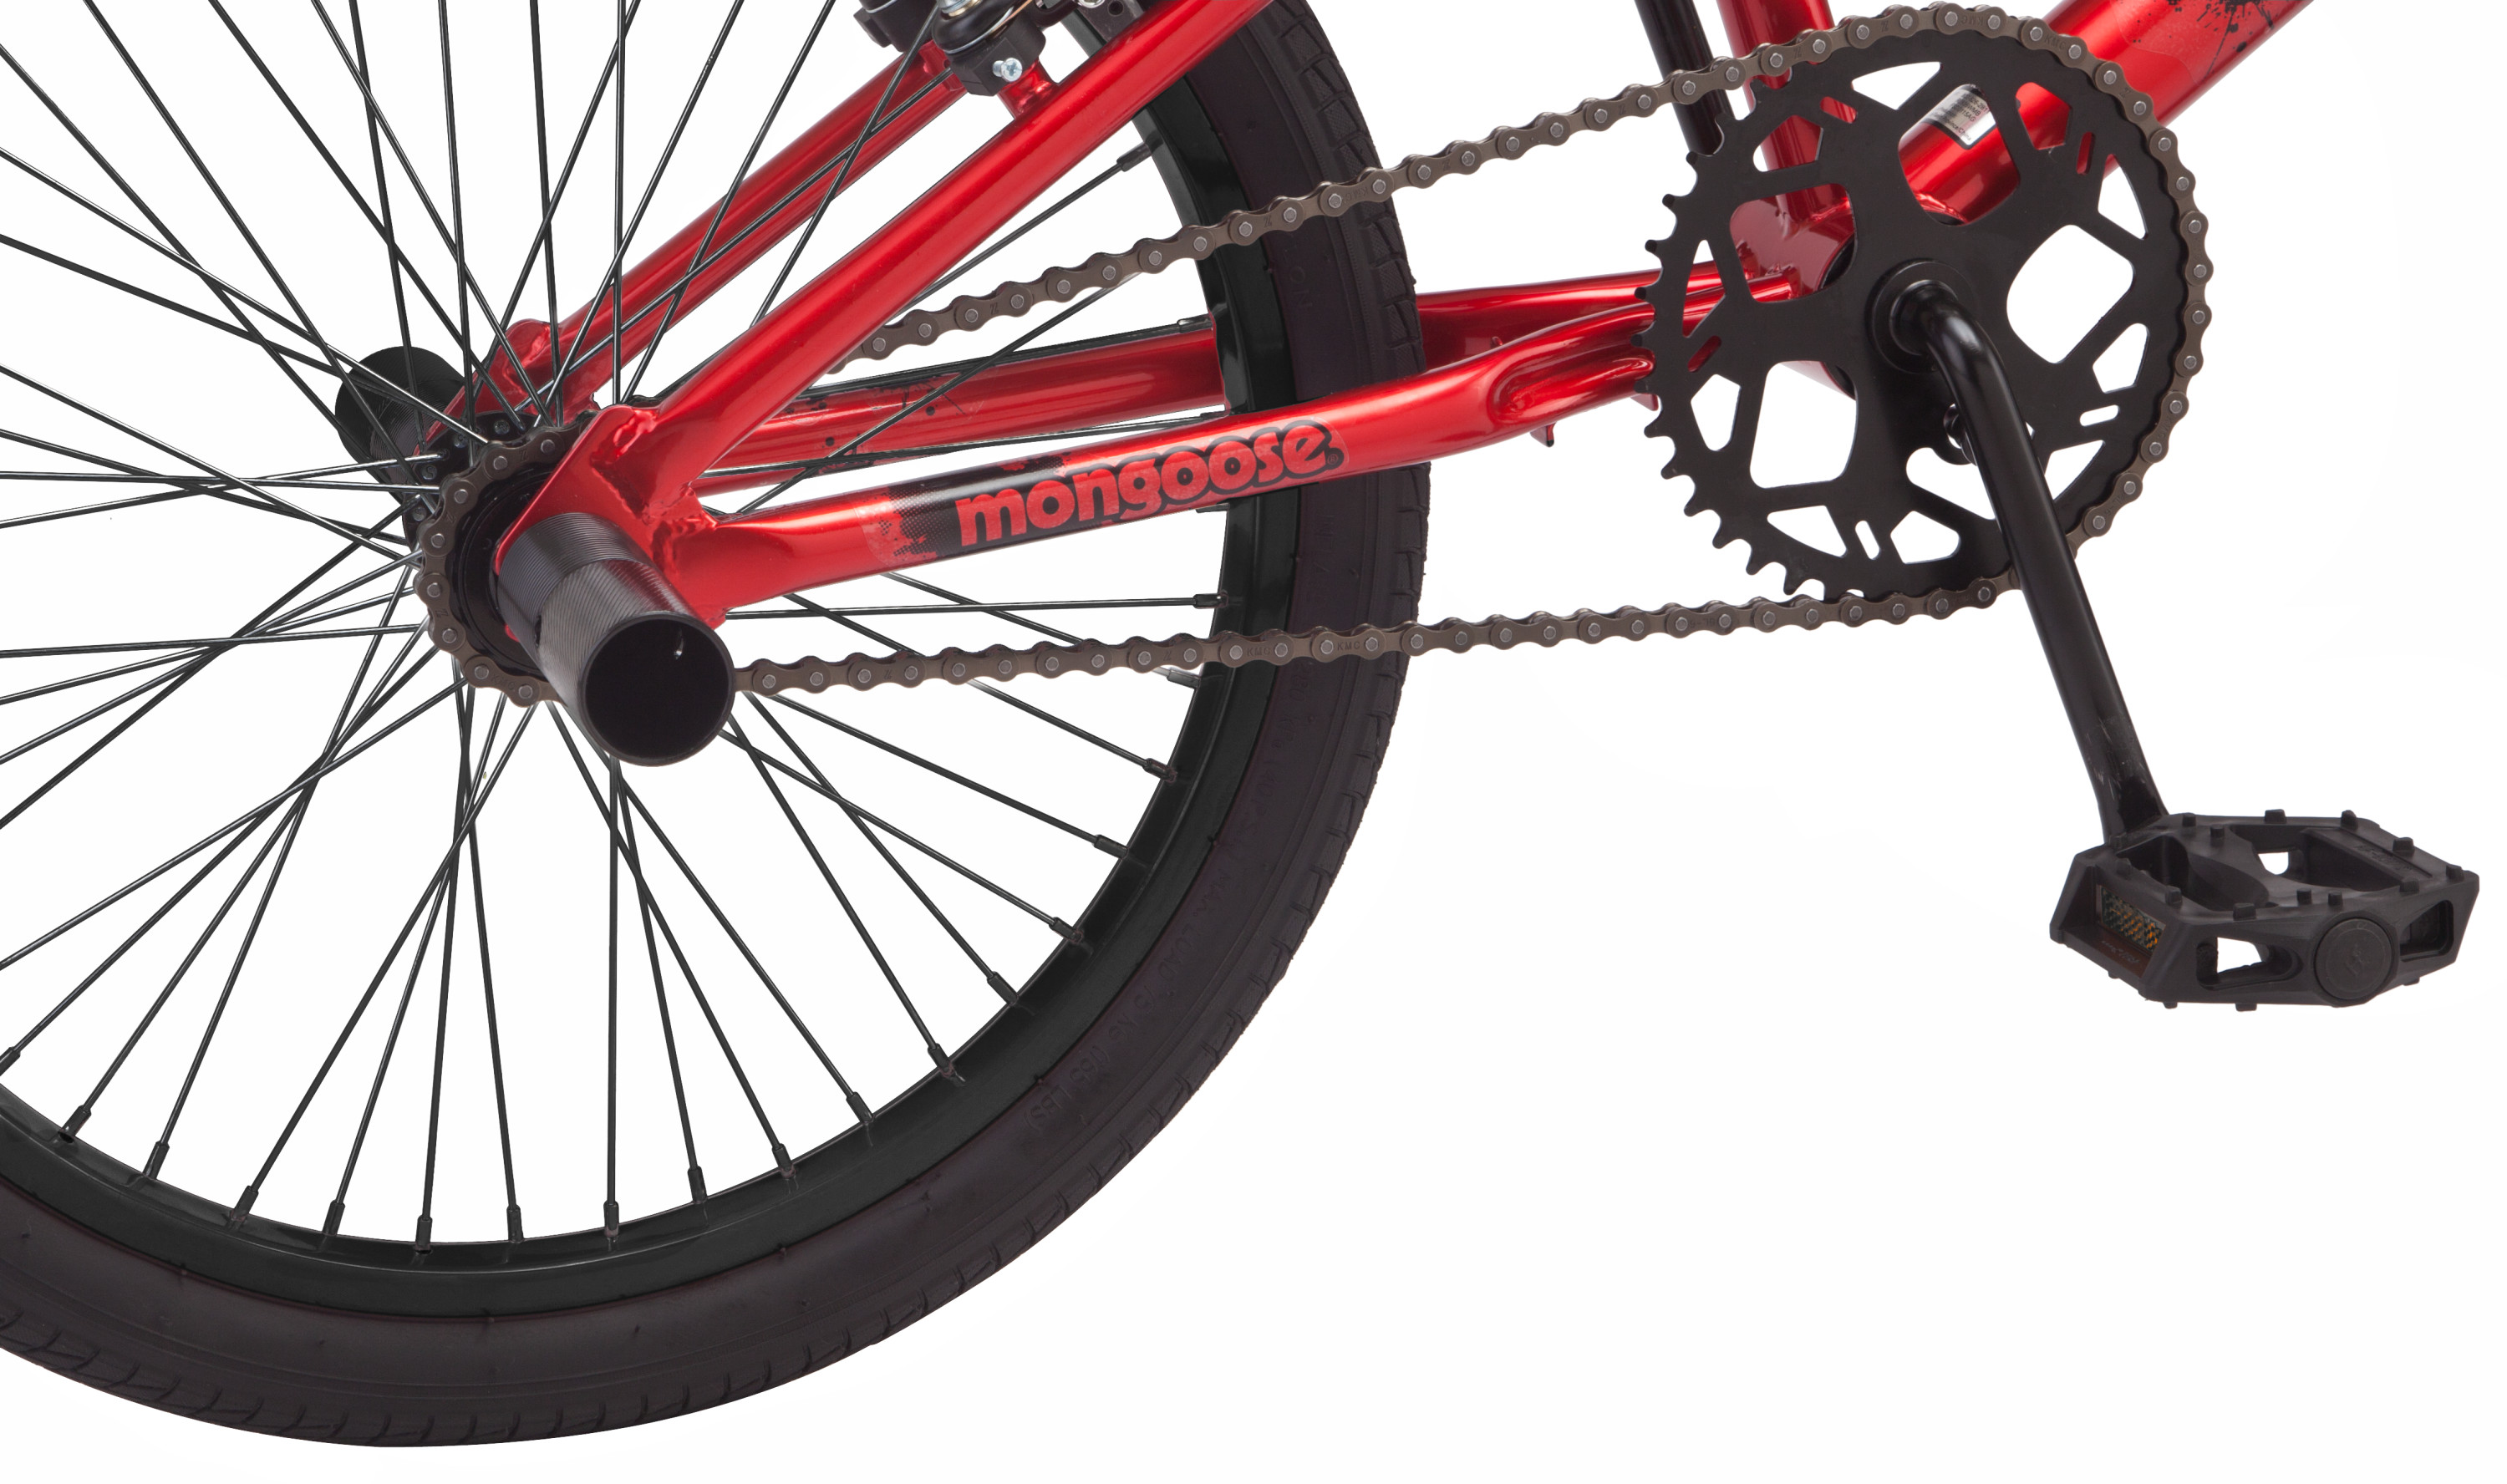 Mongoose 20" Outerlimit BMX Bike, Red - image 8 of 8